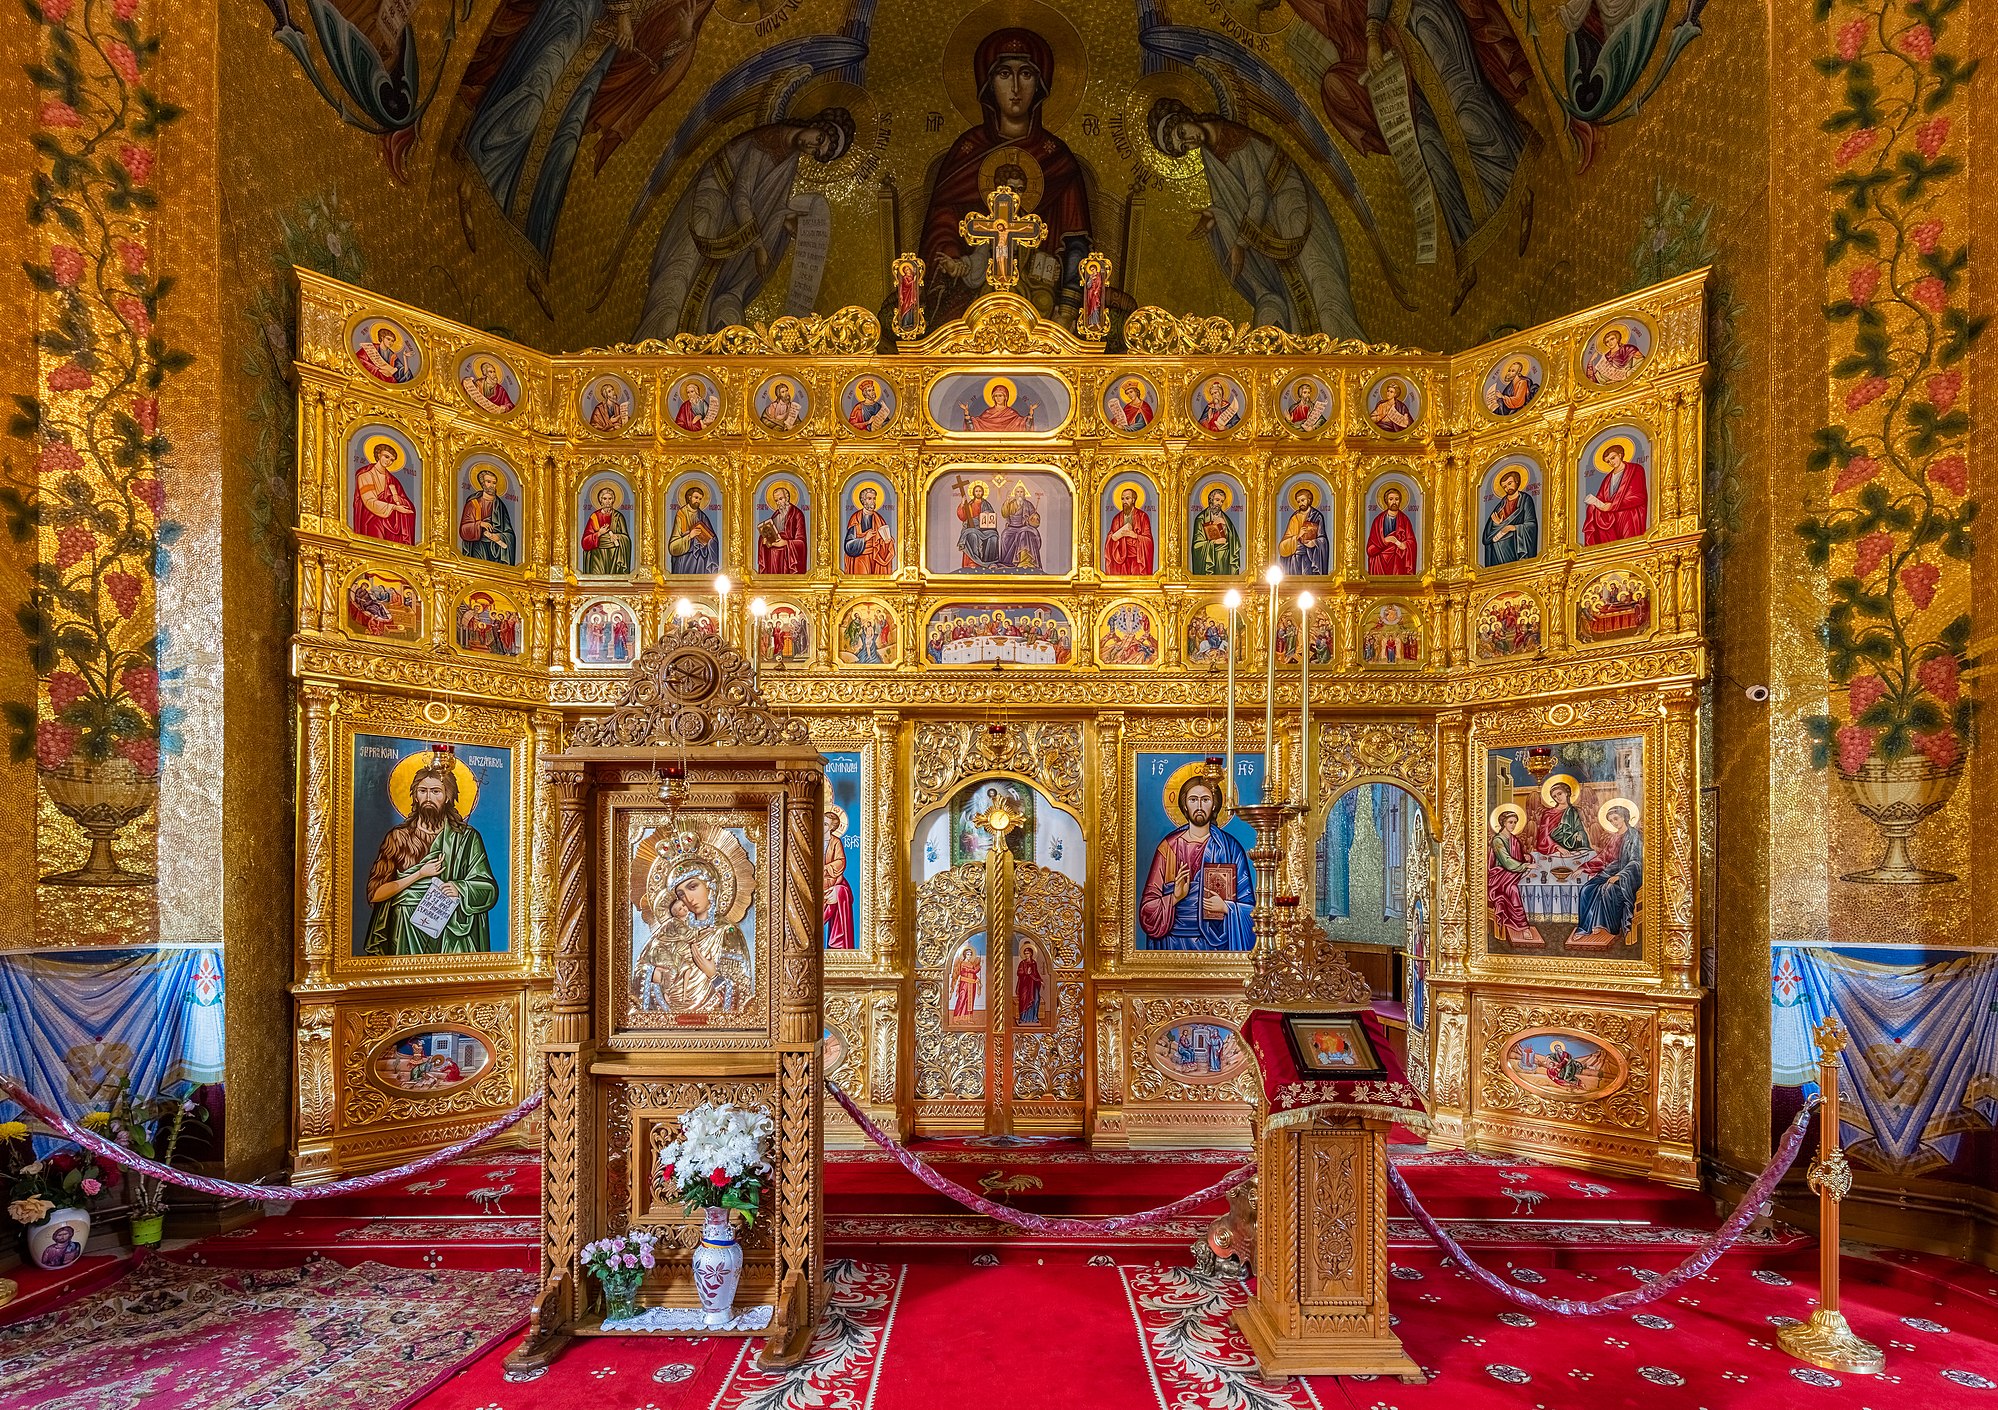 Iconostasis in the church of the Cocoș Monastery, Romania. The monastery, located in a forest clearing 6 kilometres (3.7 mi) from Niculițel, was built between 1883 and 1913 and is dedicated to the Dormition of the Theotokos.